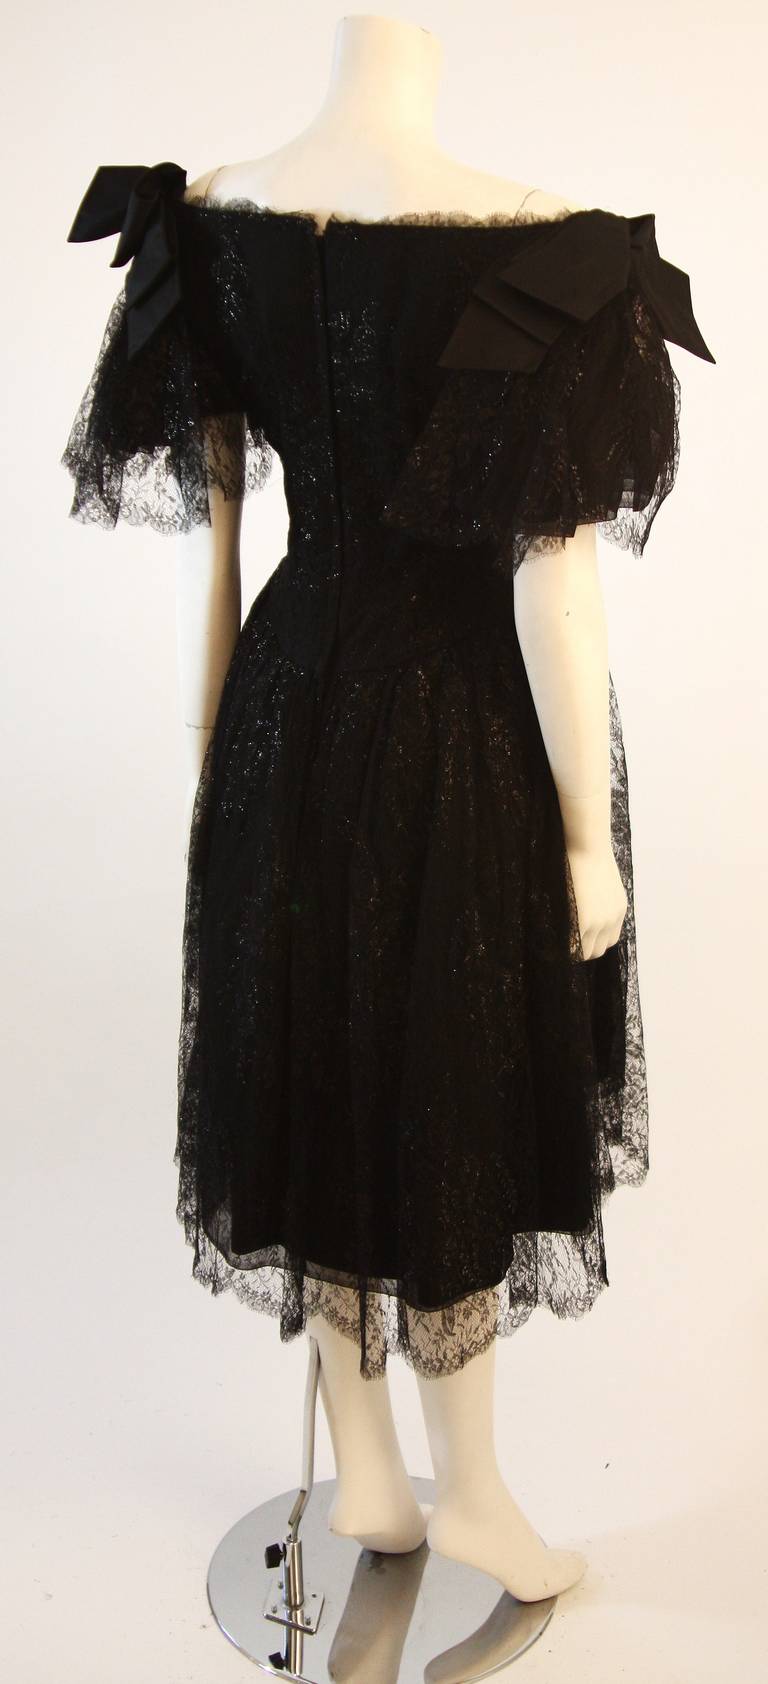 Men's Nolan Miller Lovely Black Cocktail Dress with Lace and Bow Sleeves For Sale